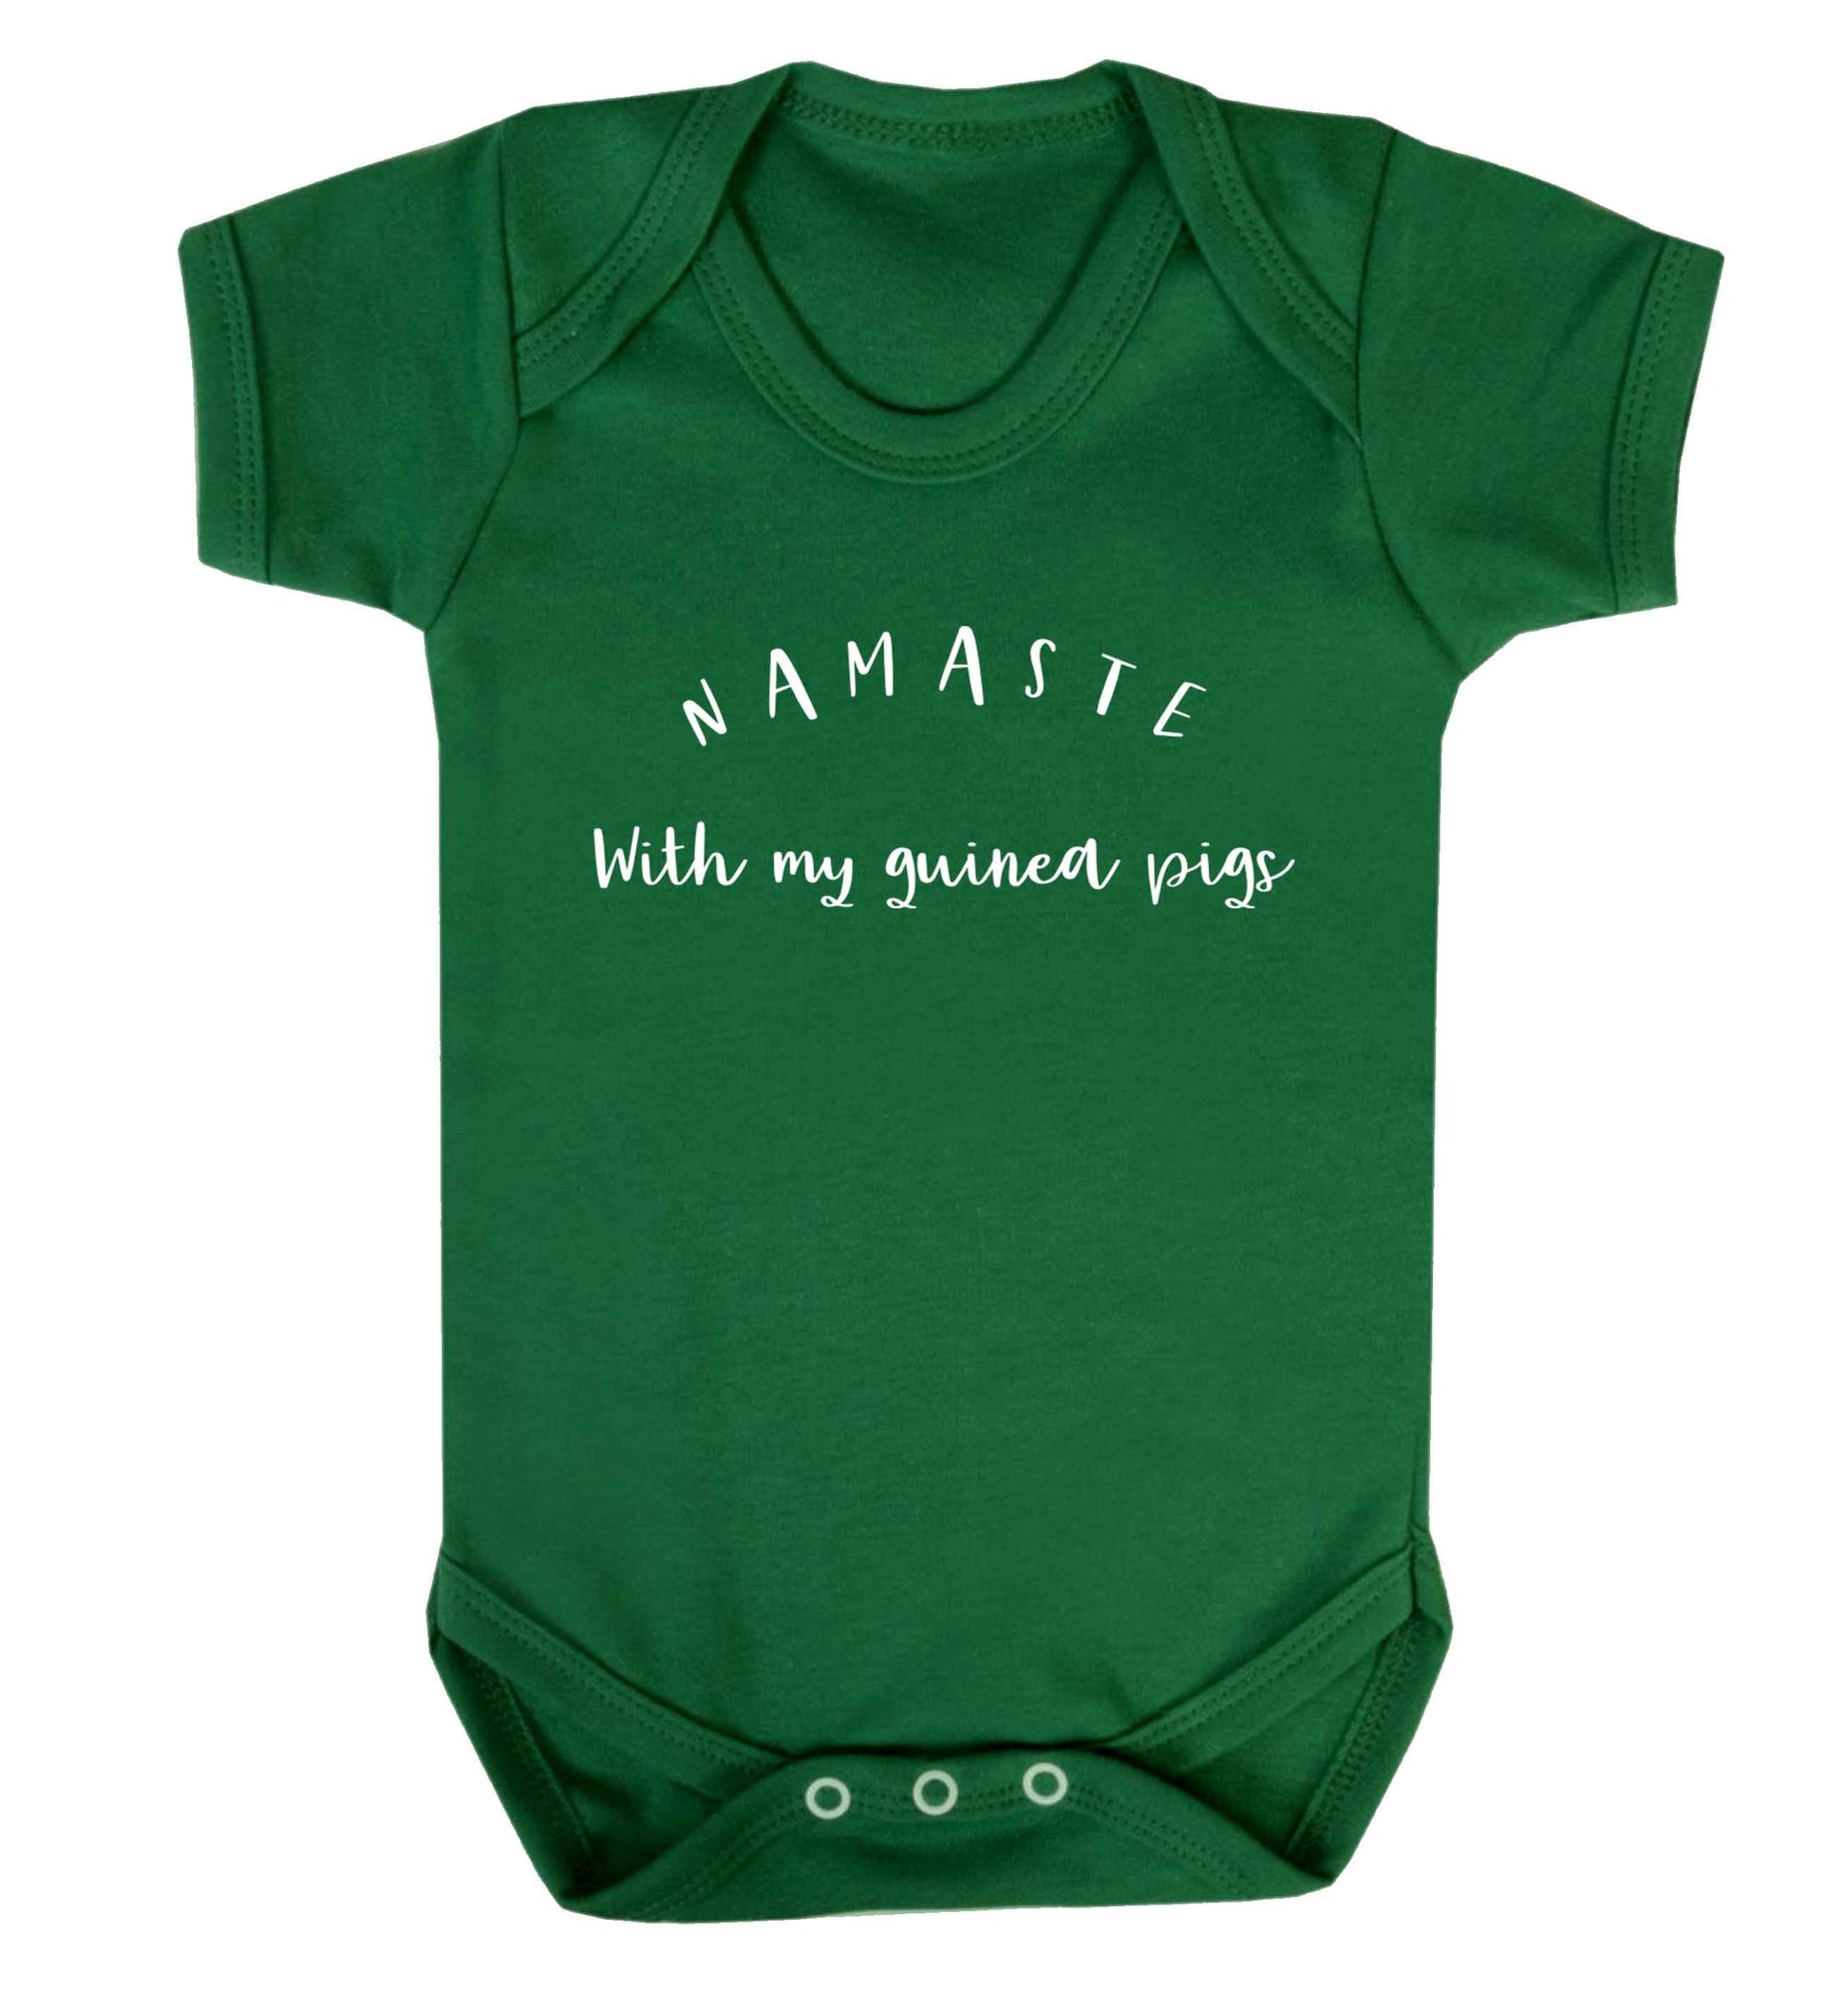 Namaste with my guinea pigs Baby Vest green 18-24 months